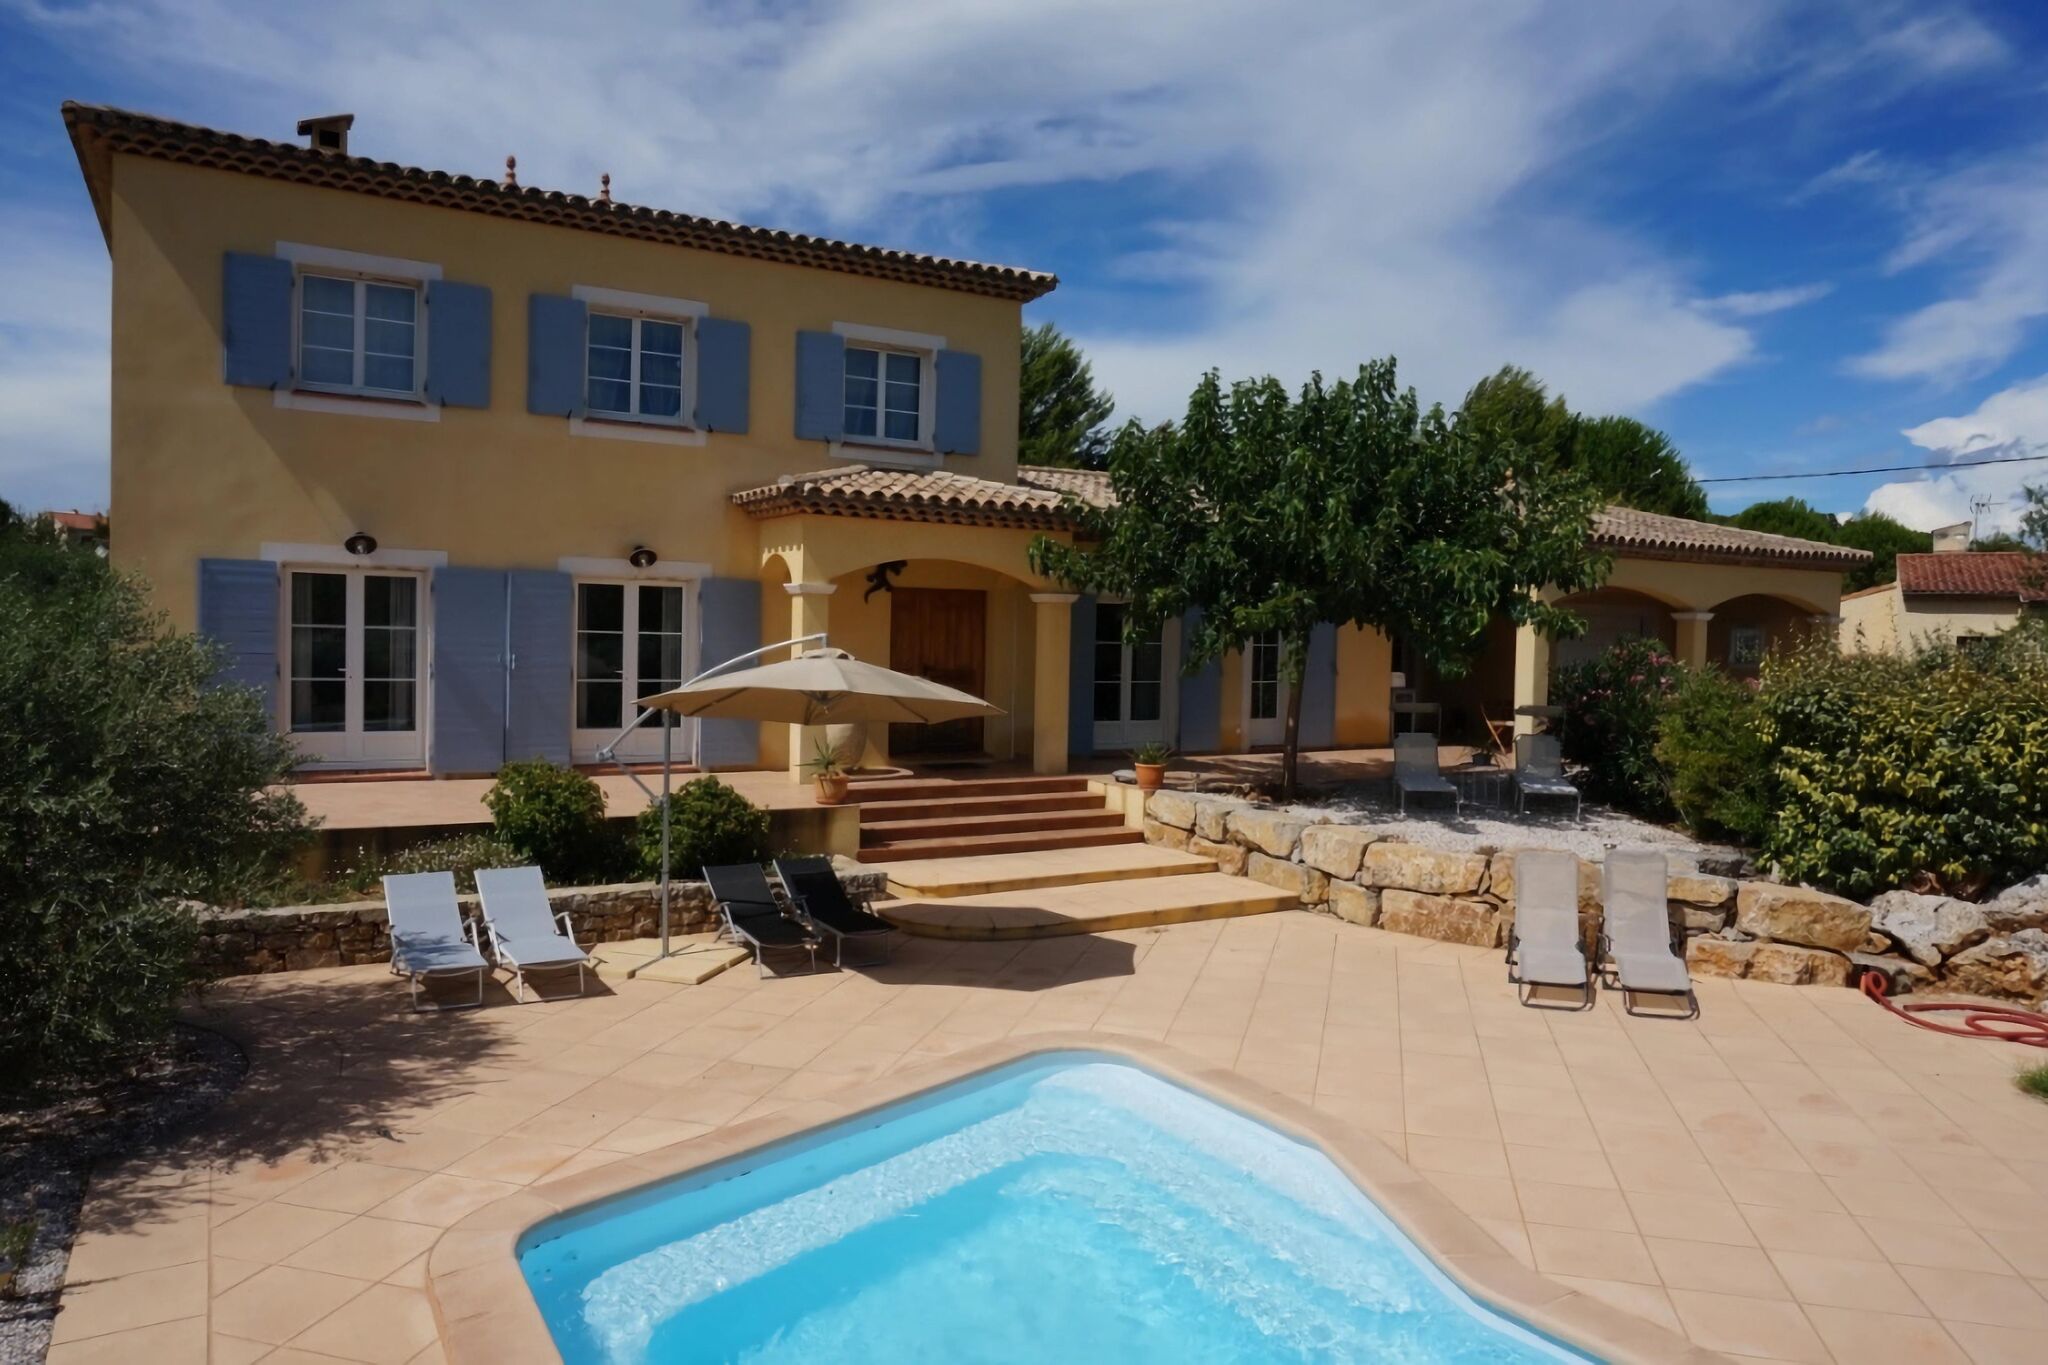 Beautiful holiday home in Les-Arcs -Sur-Argens with pool